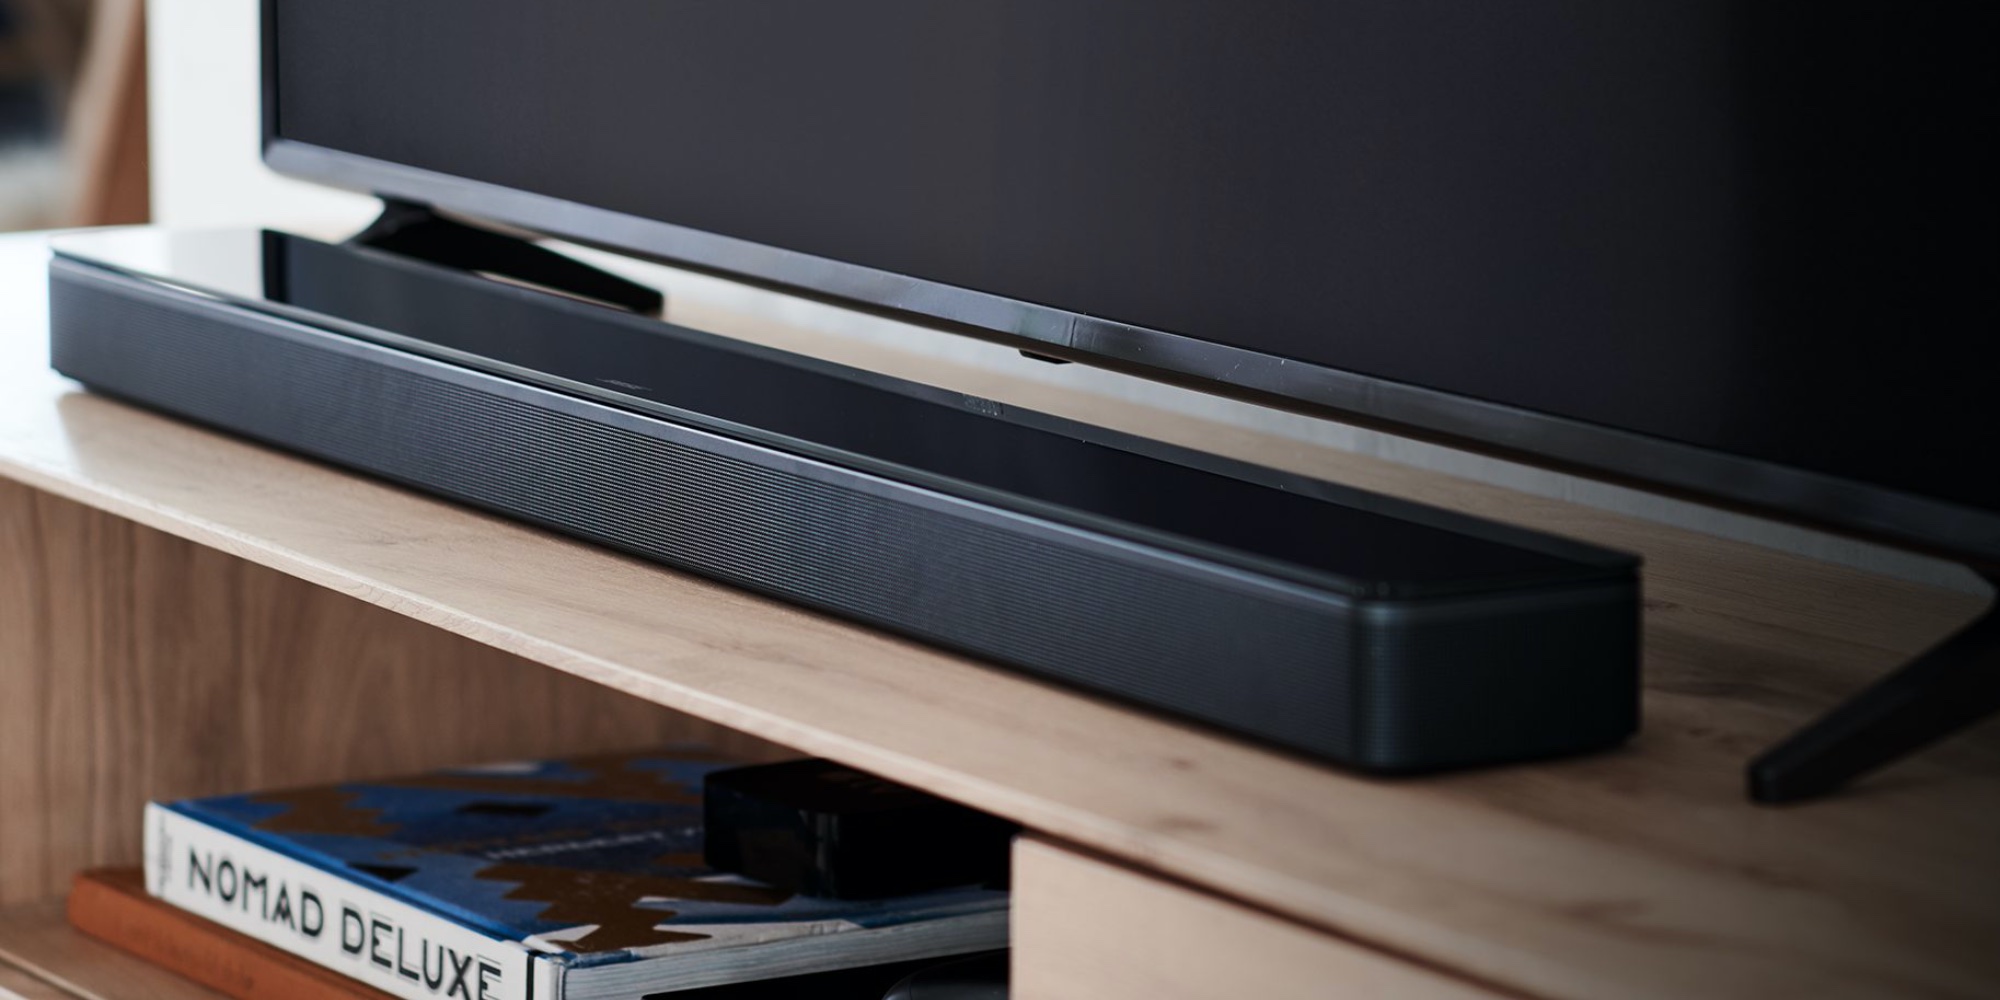 Latest Bose outlet sale takes $99 off AirPlay 2 Soundbar 700, more 